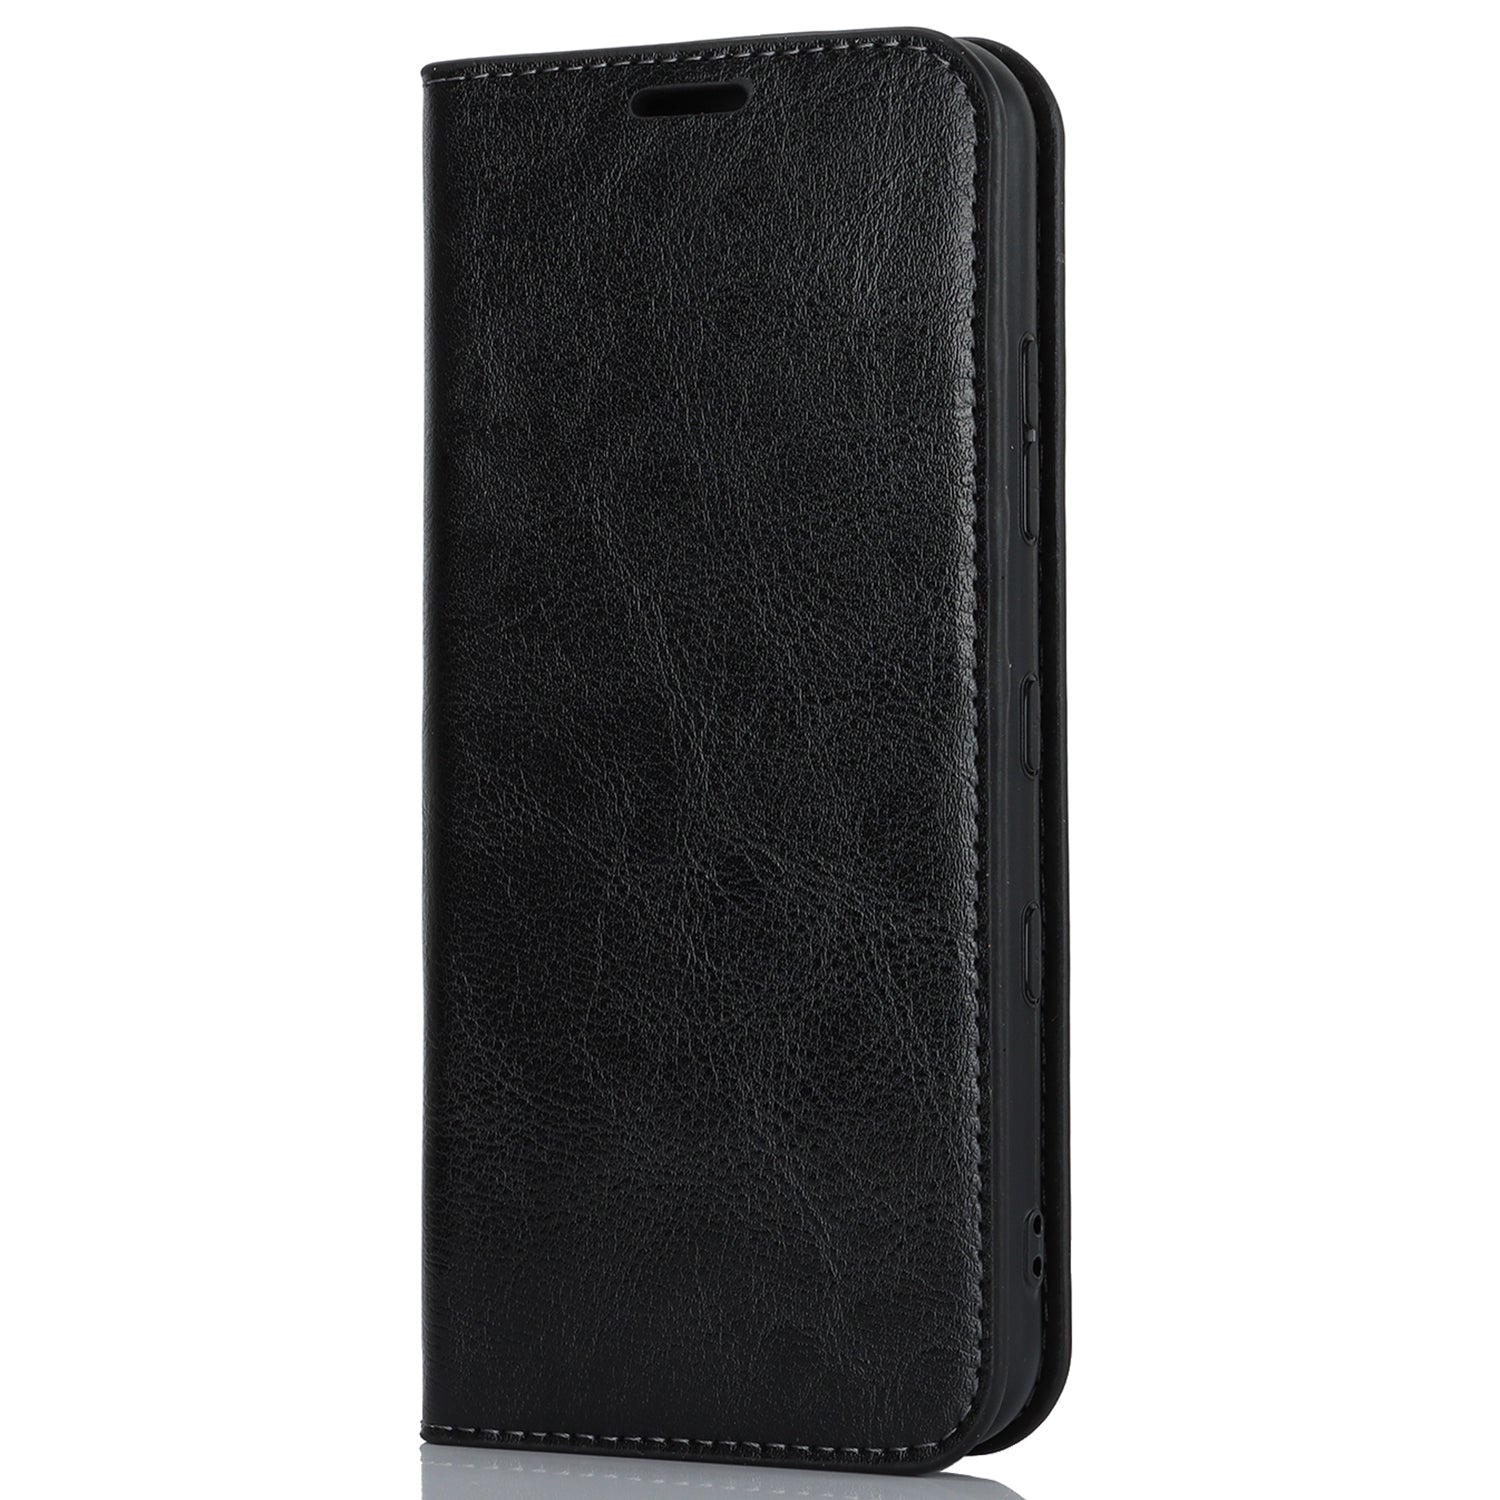 Uniqkart for Kyocera Digno SX3 KYG02 Phone Case Crazy Horse Texture Genuine Cow Leather Stand Wallet Anti-drop Cover - Black